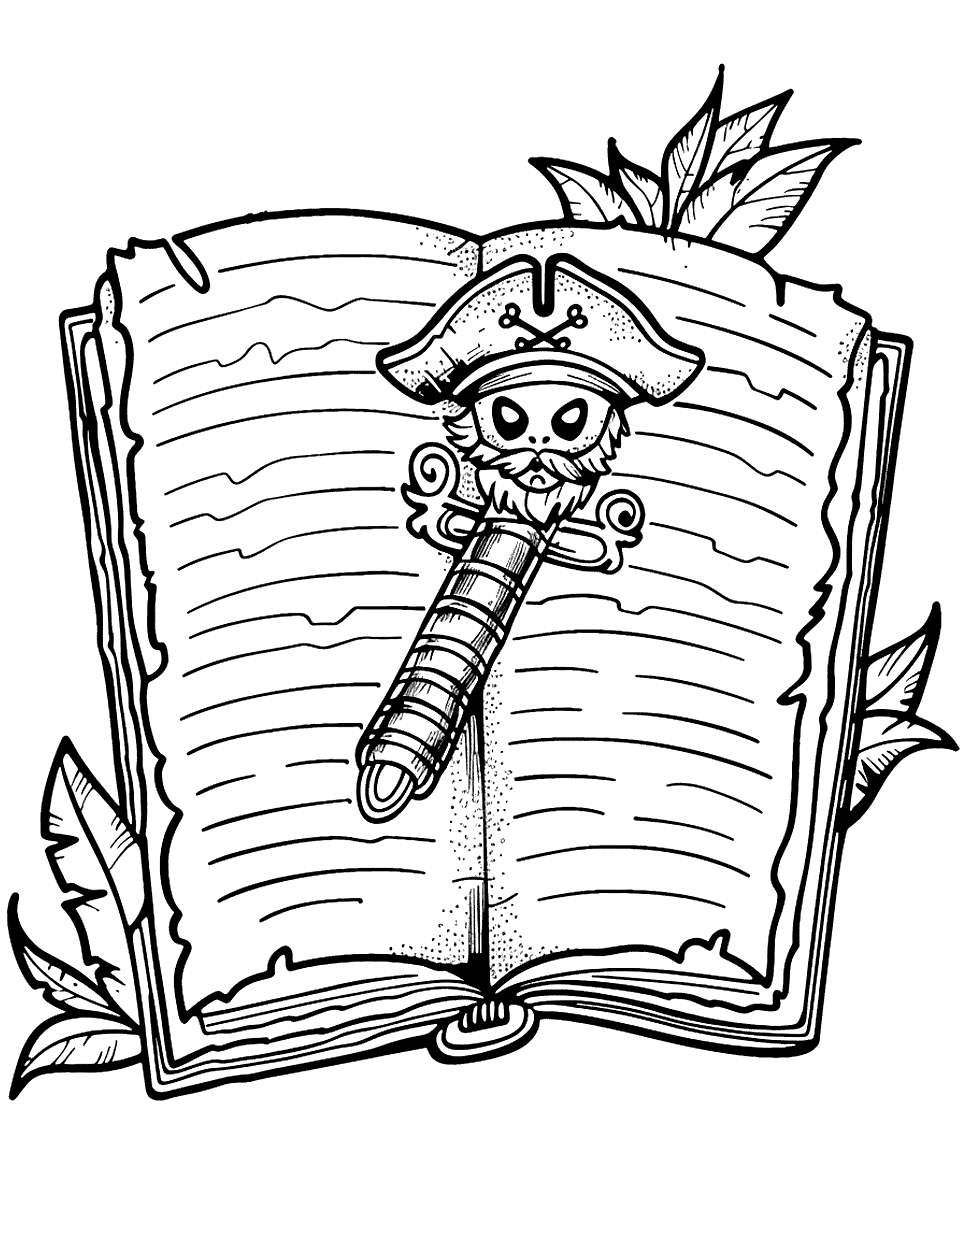 Pirate Captain’s Log Coloring Page - An open pirate captain’s log book with a unique pen.